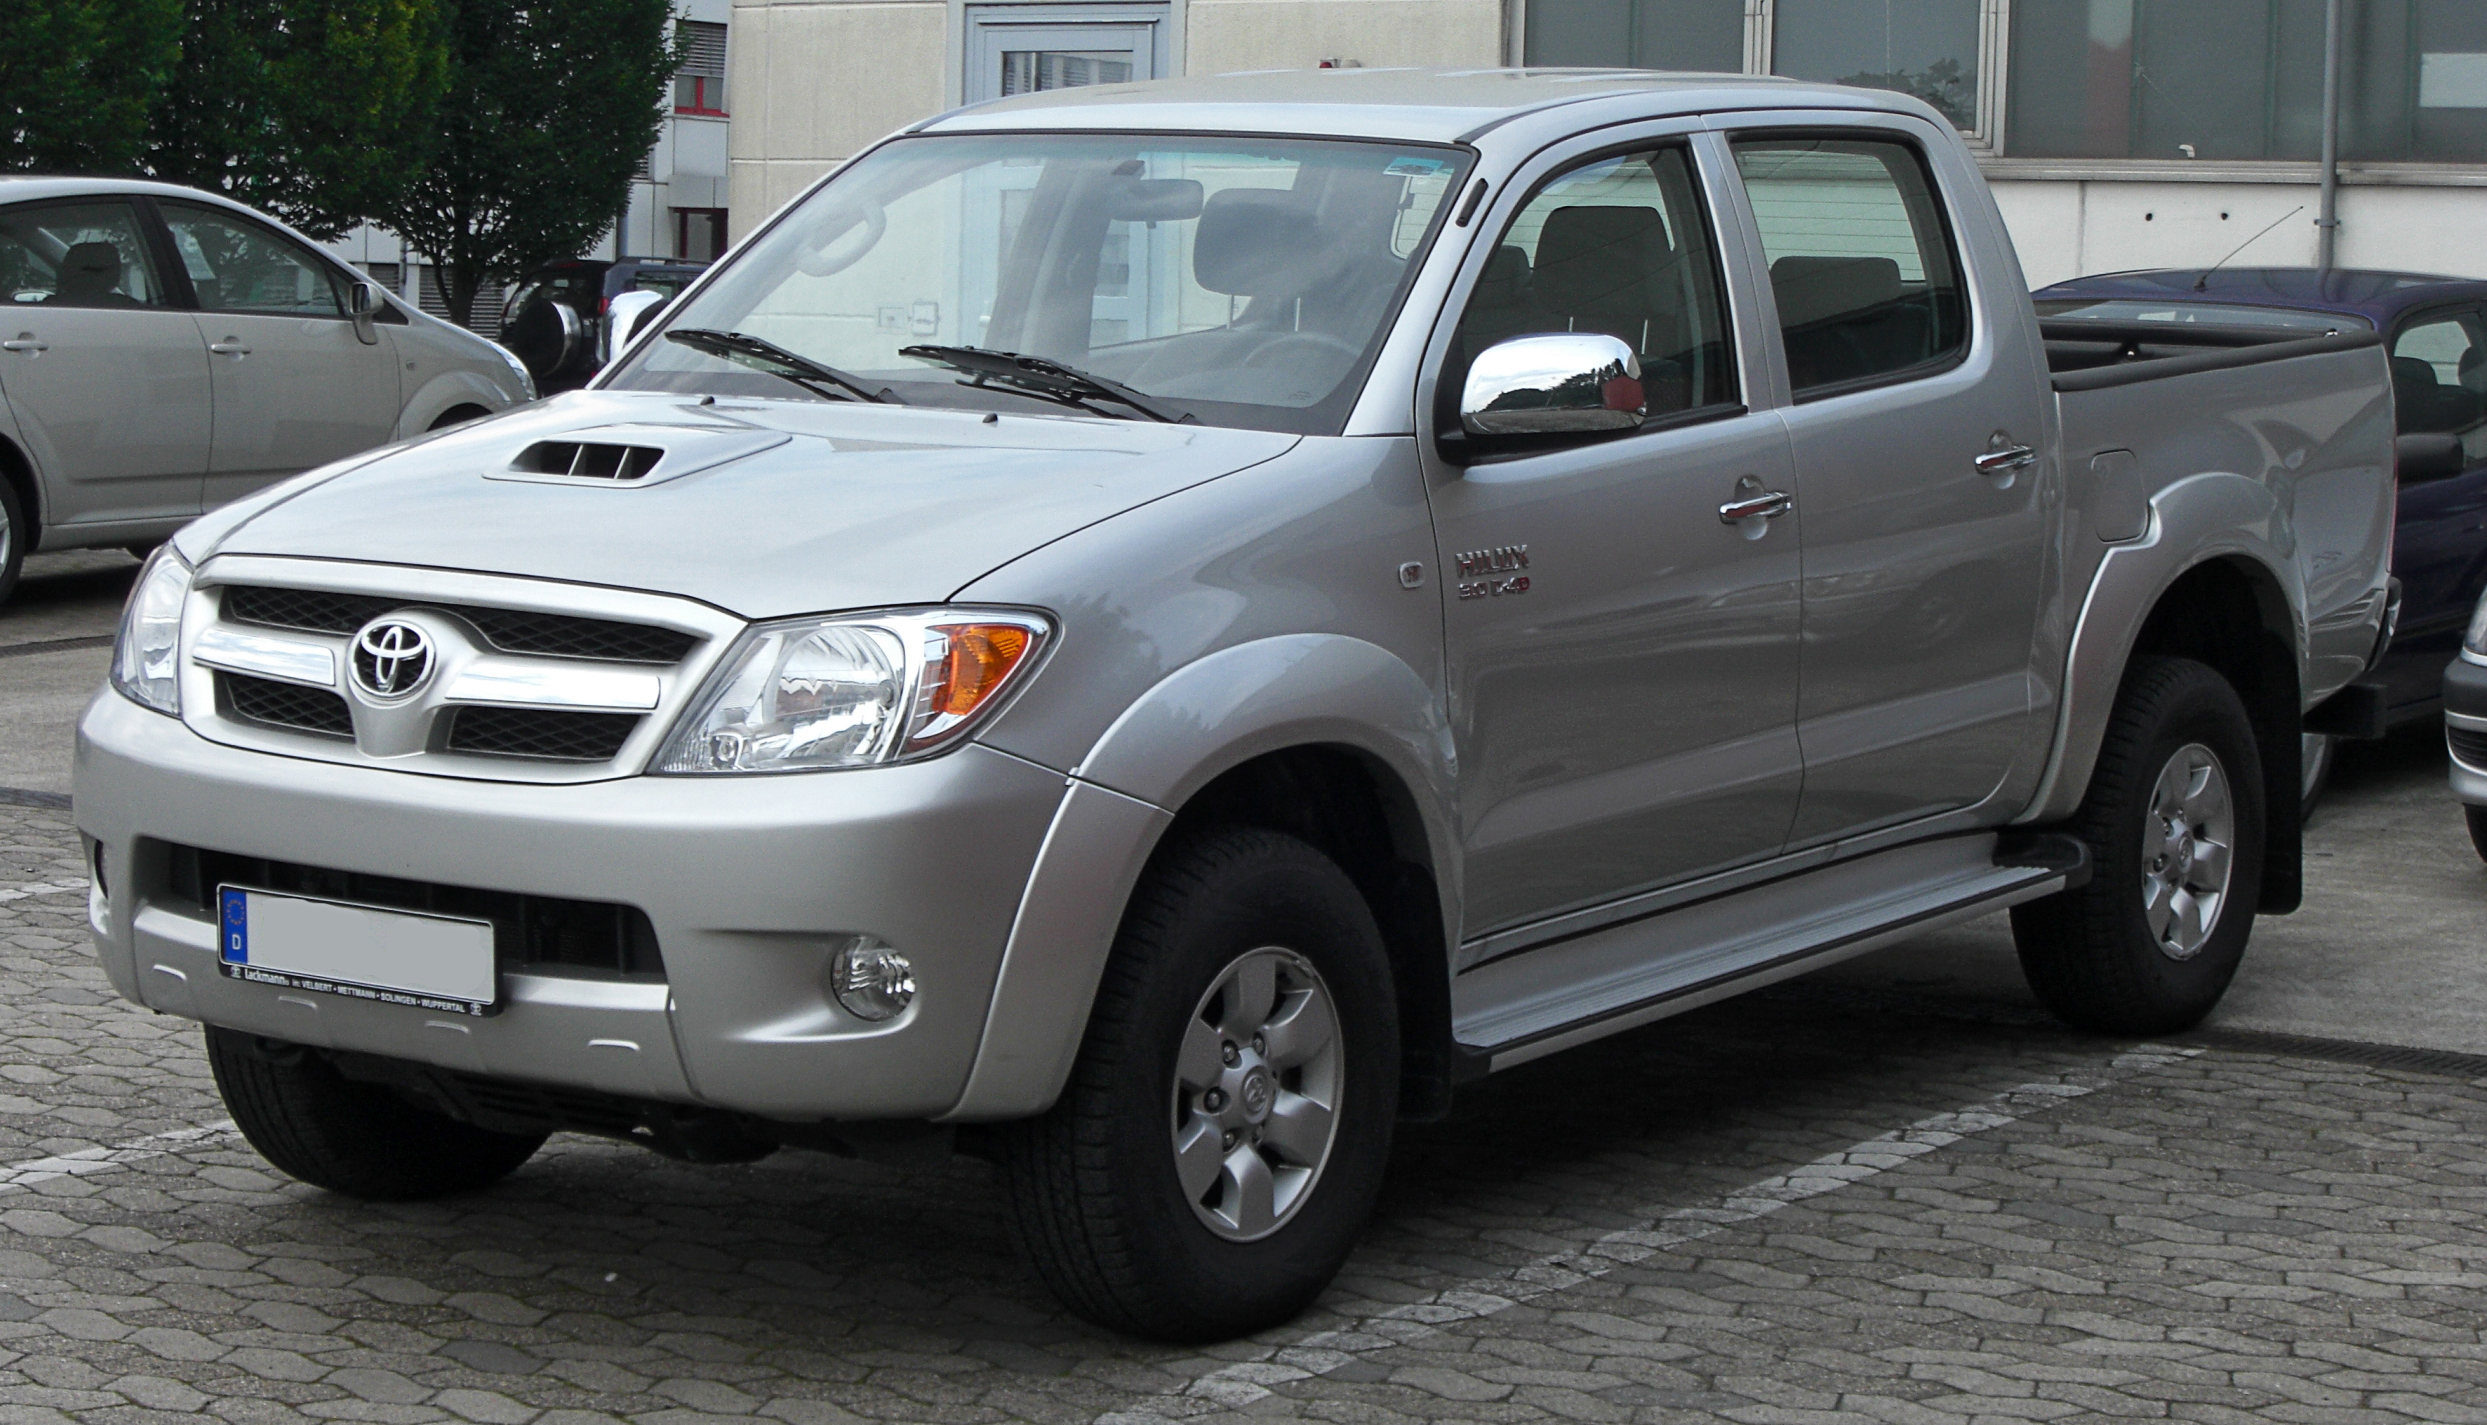 File:Toyota Hilux Double Cab 3.0 D-4D front.jpg - Wikimedia Commons